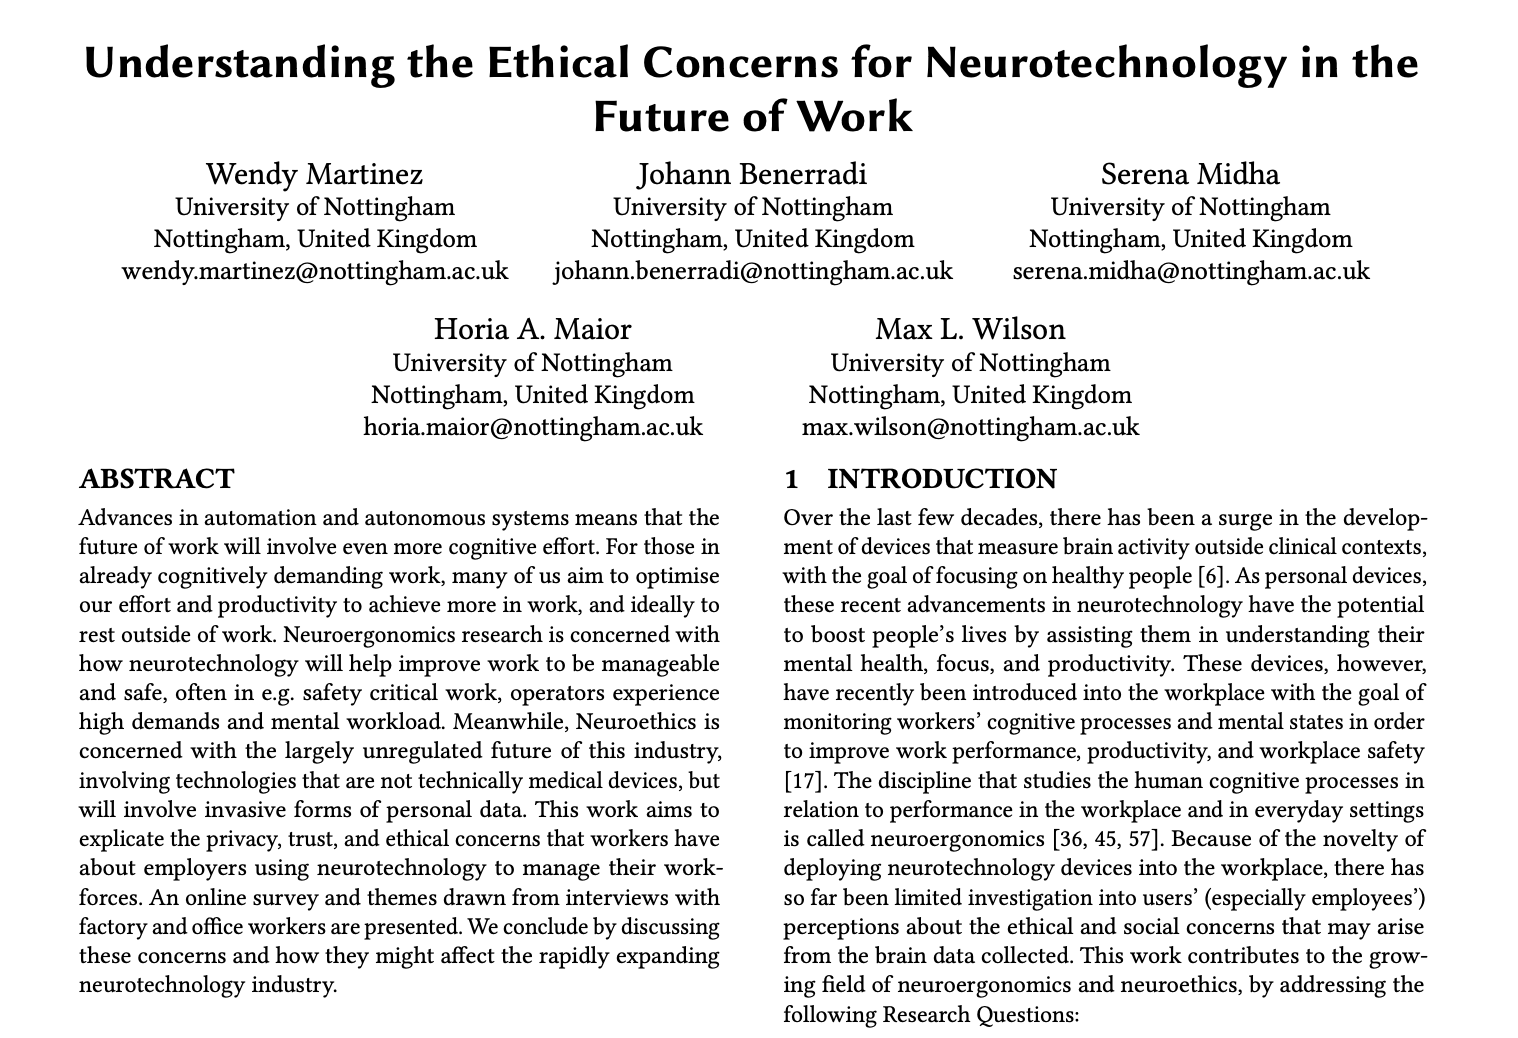 image of research paper entitled Undesrtanding the Ethical Concerns for Neurotechnology in the Future of Work.